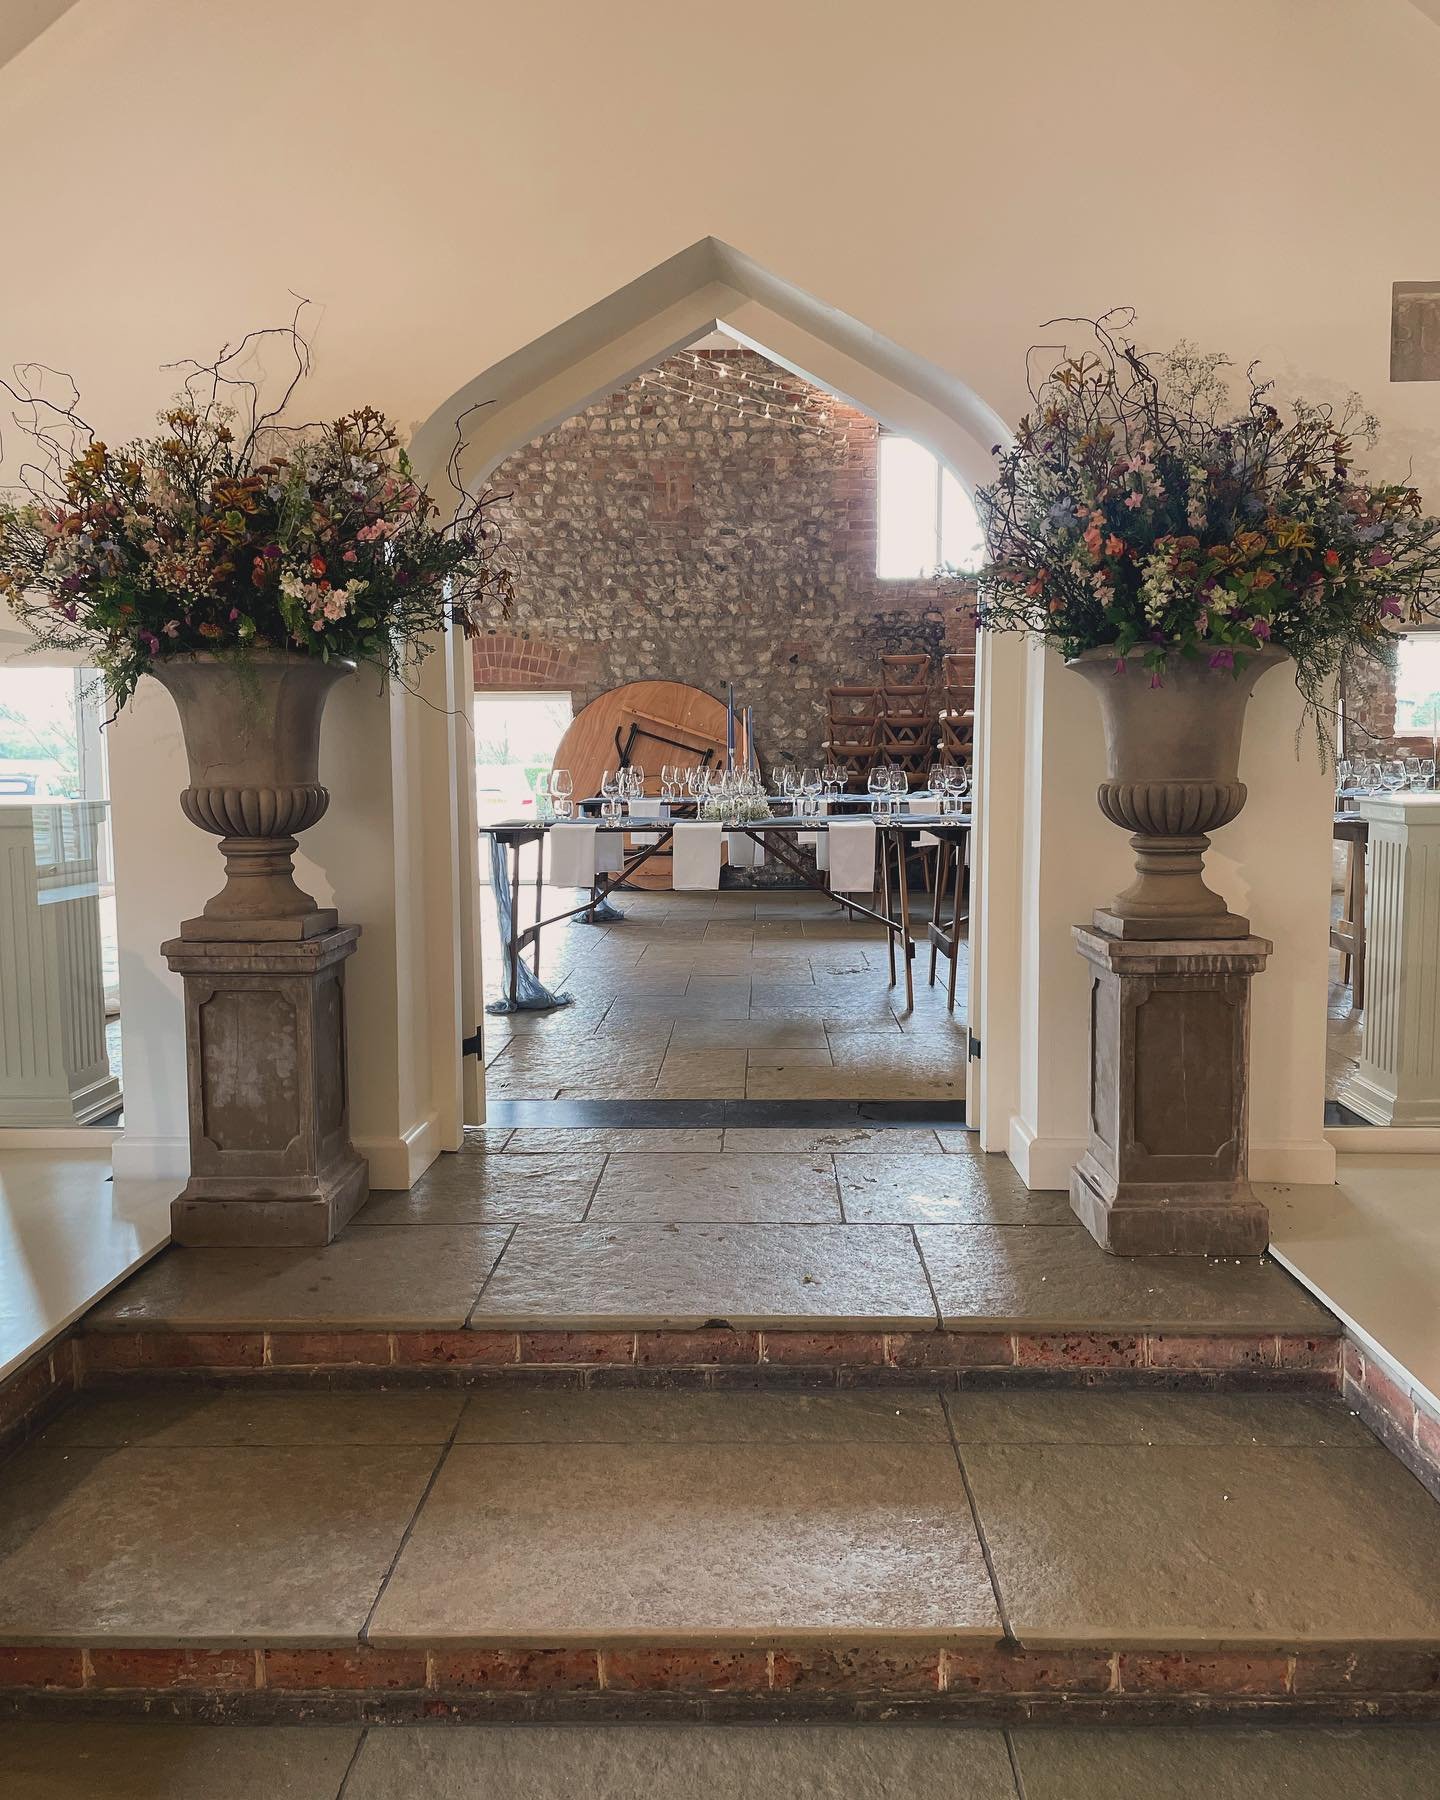 With our first wedding completed last weekend, we are in full wedding mode for the season ahead! Let&rsquo;s pray for sunshine! #sussexweddingflowers #sussexflorist #farbridgebarn #farbridgewedding